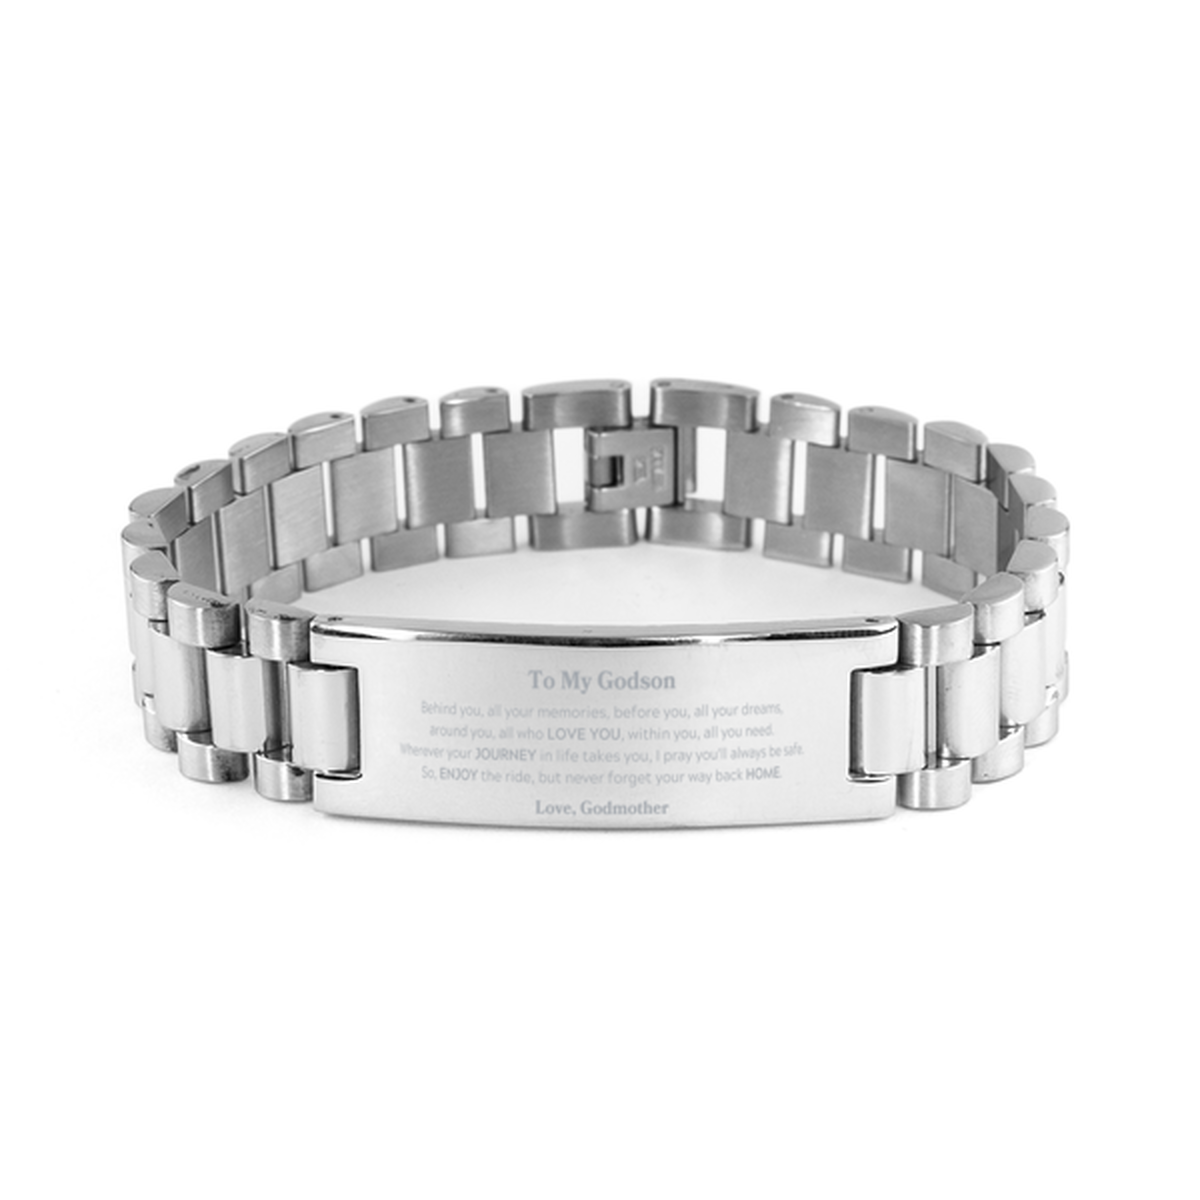 To My Godson Graduation Gifts from Godmother, Godson Ladder Stainless Steel Bracelet Christmas Birthday Gifts for Godson Behind you, all your memories, before you, all your dreams. Love, Godmother